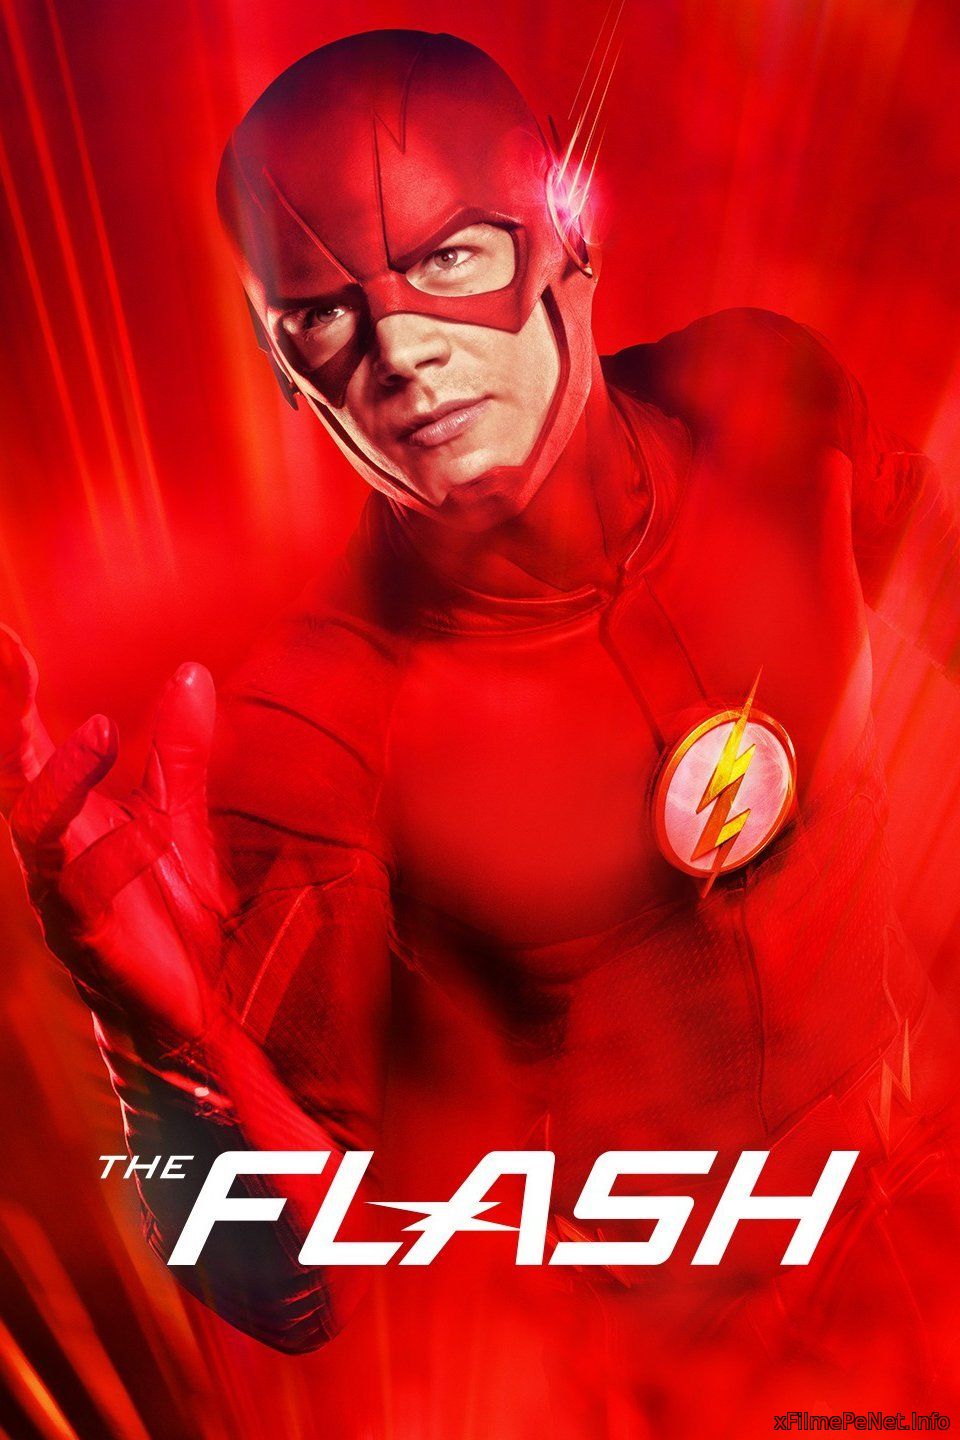 The Flash Sezon 02 Episod 13 - Welcome to Earth-2